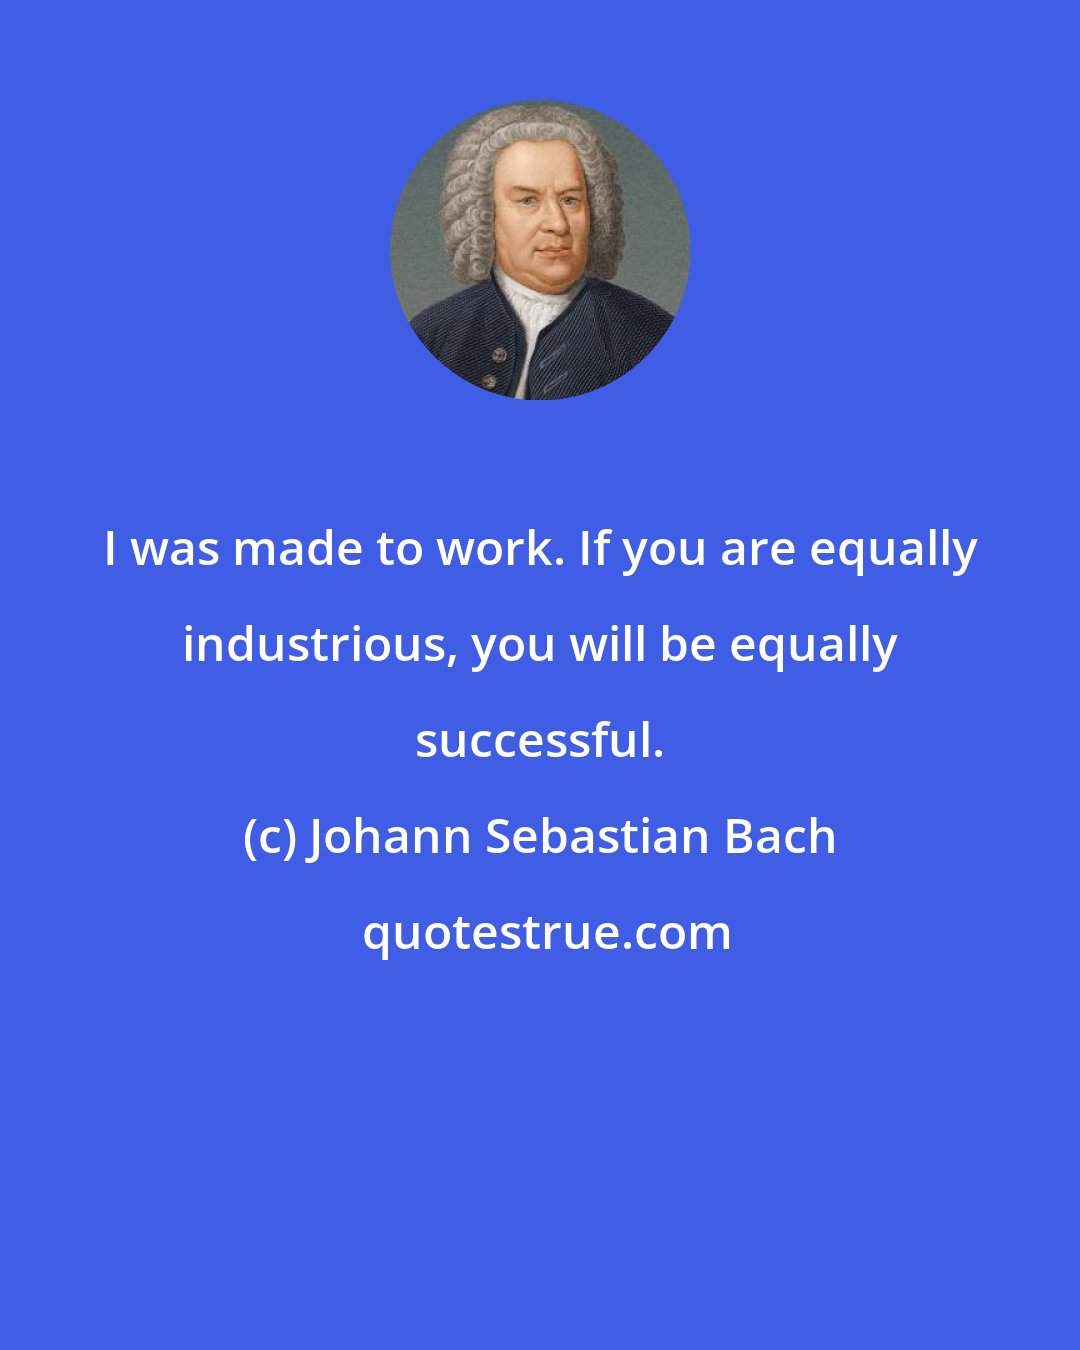 Johann Sebastian Bach: I was made to work. If you are equally industrious, you will be equally successful.